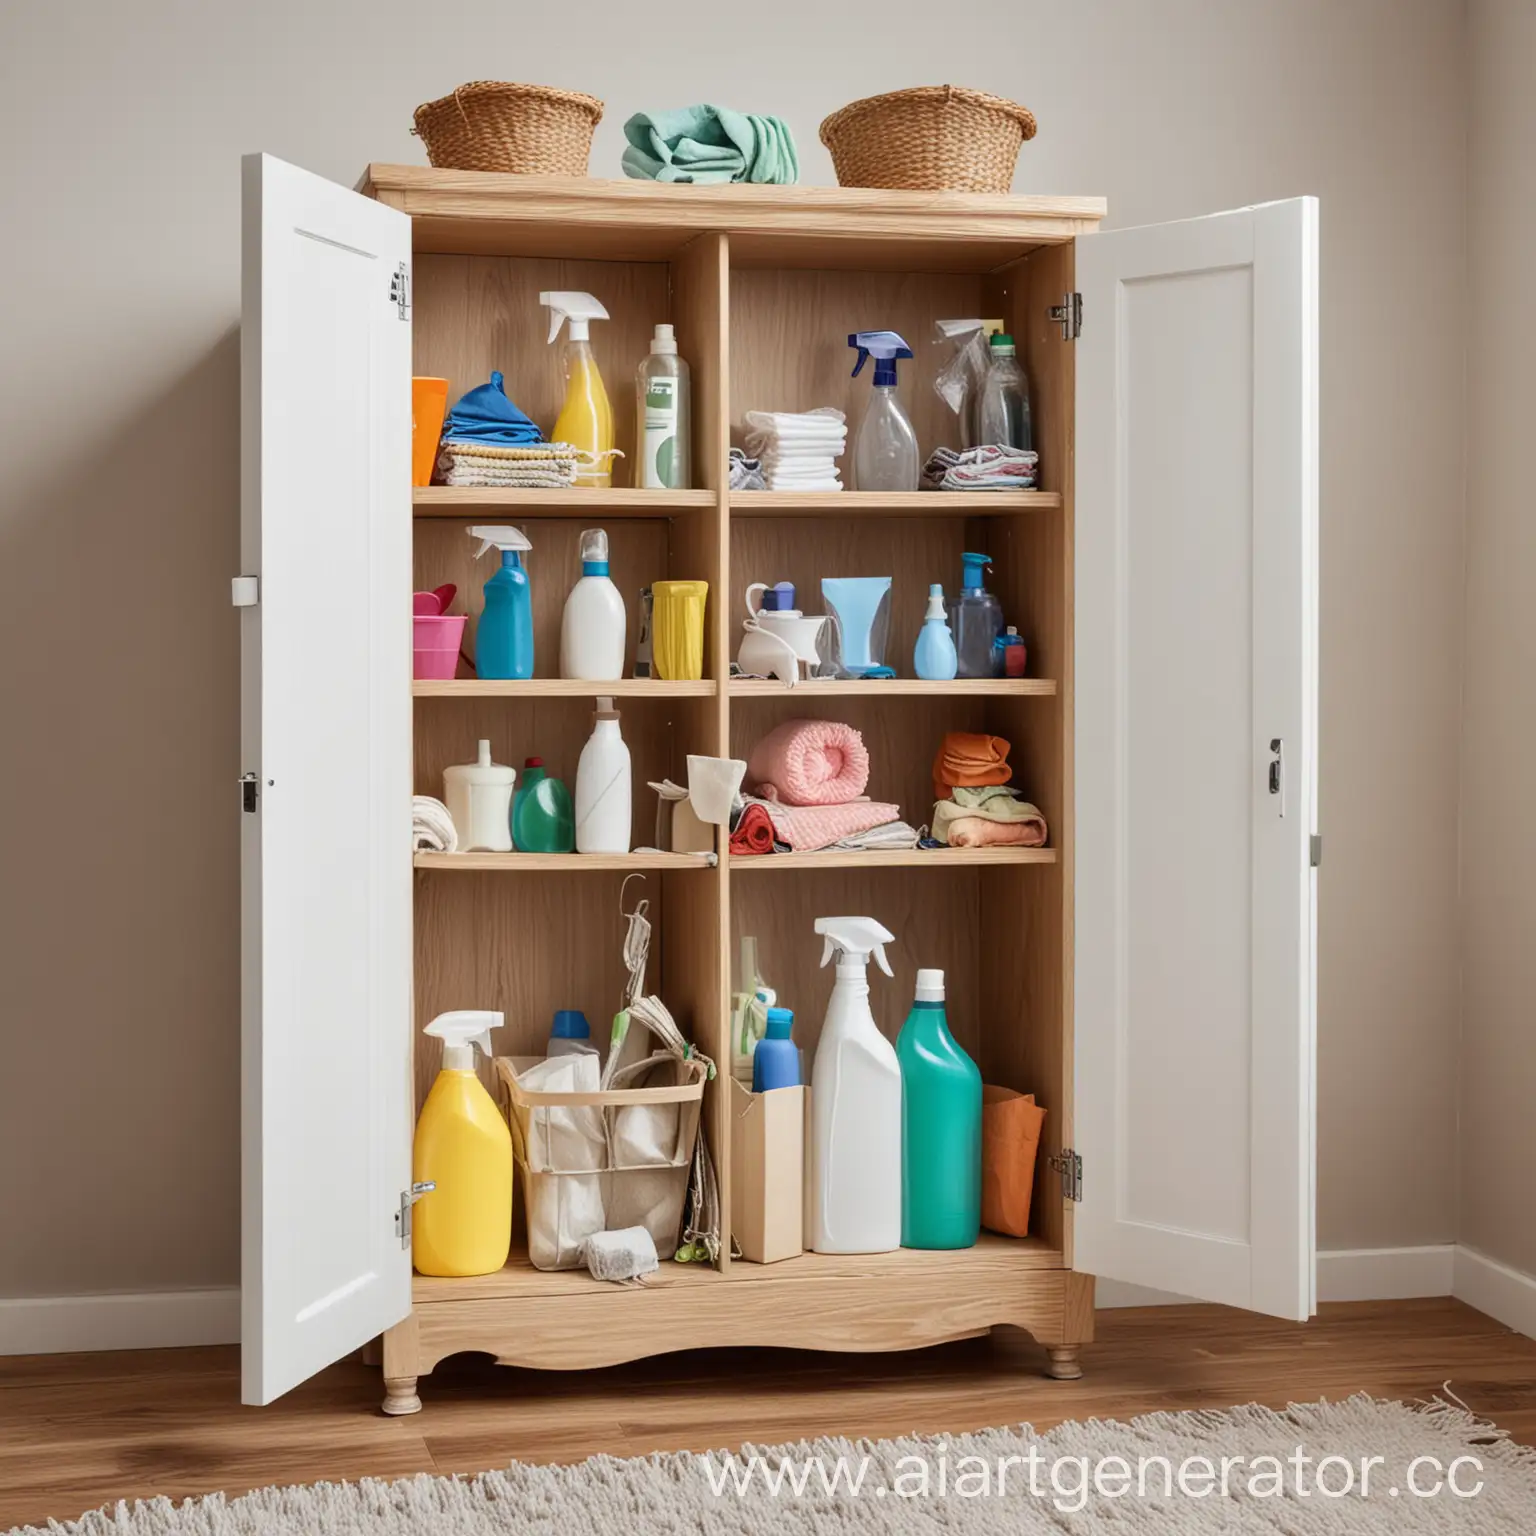 Organized-Cupboard-with-Cleaning-Supplies-and-Rags